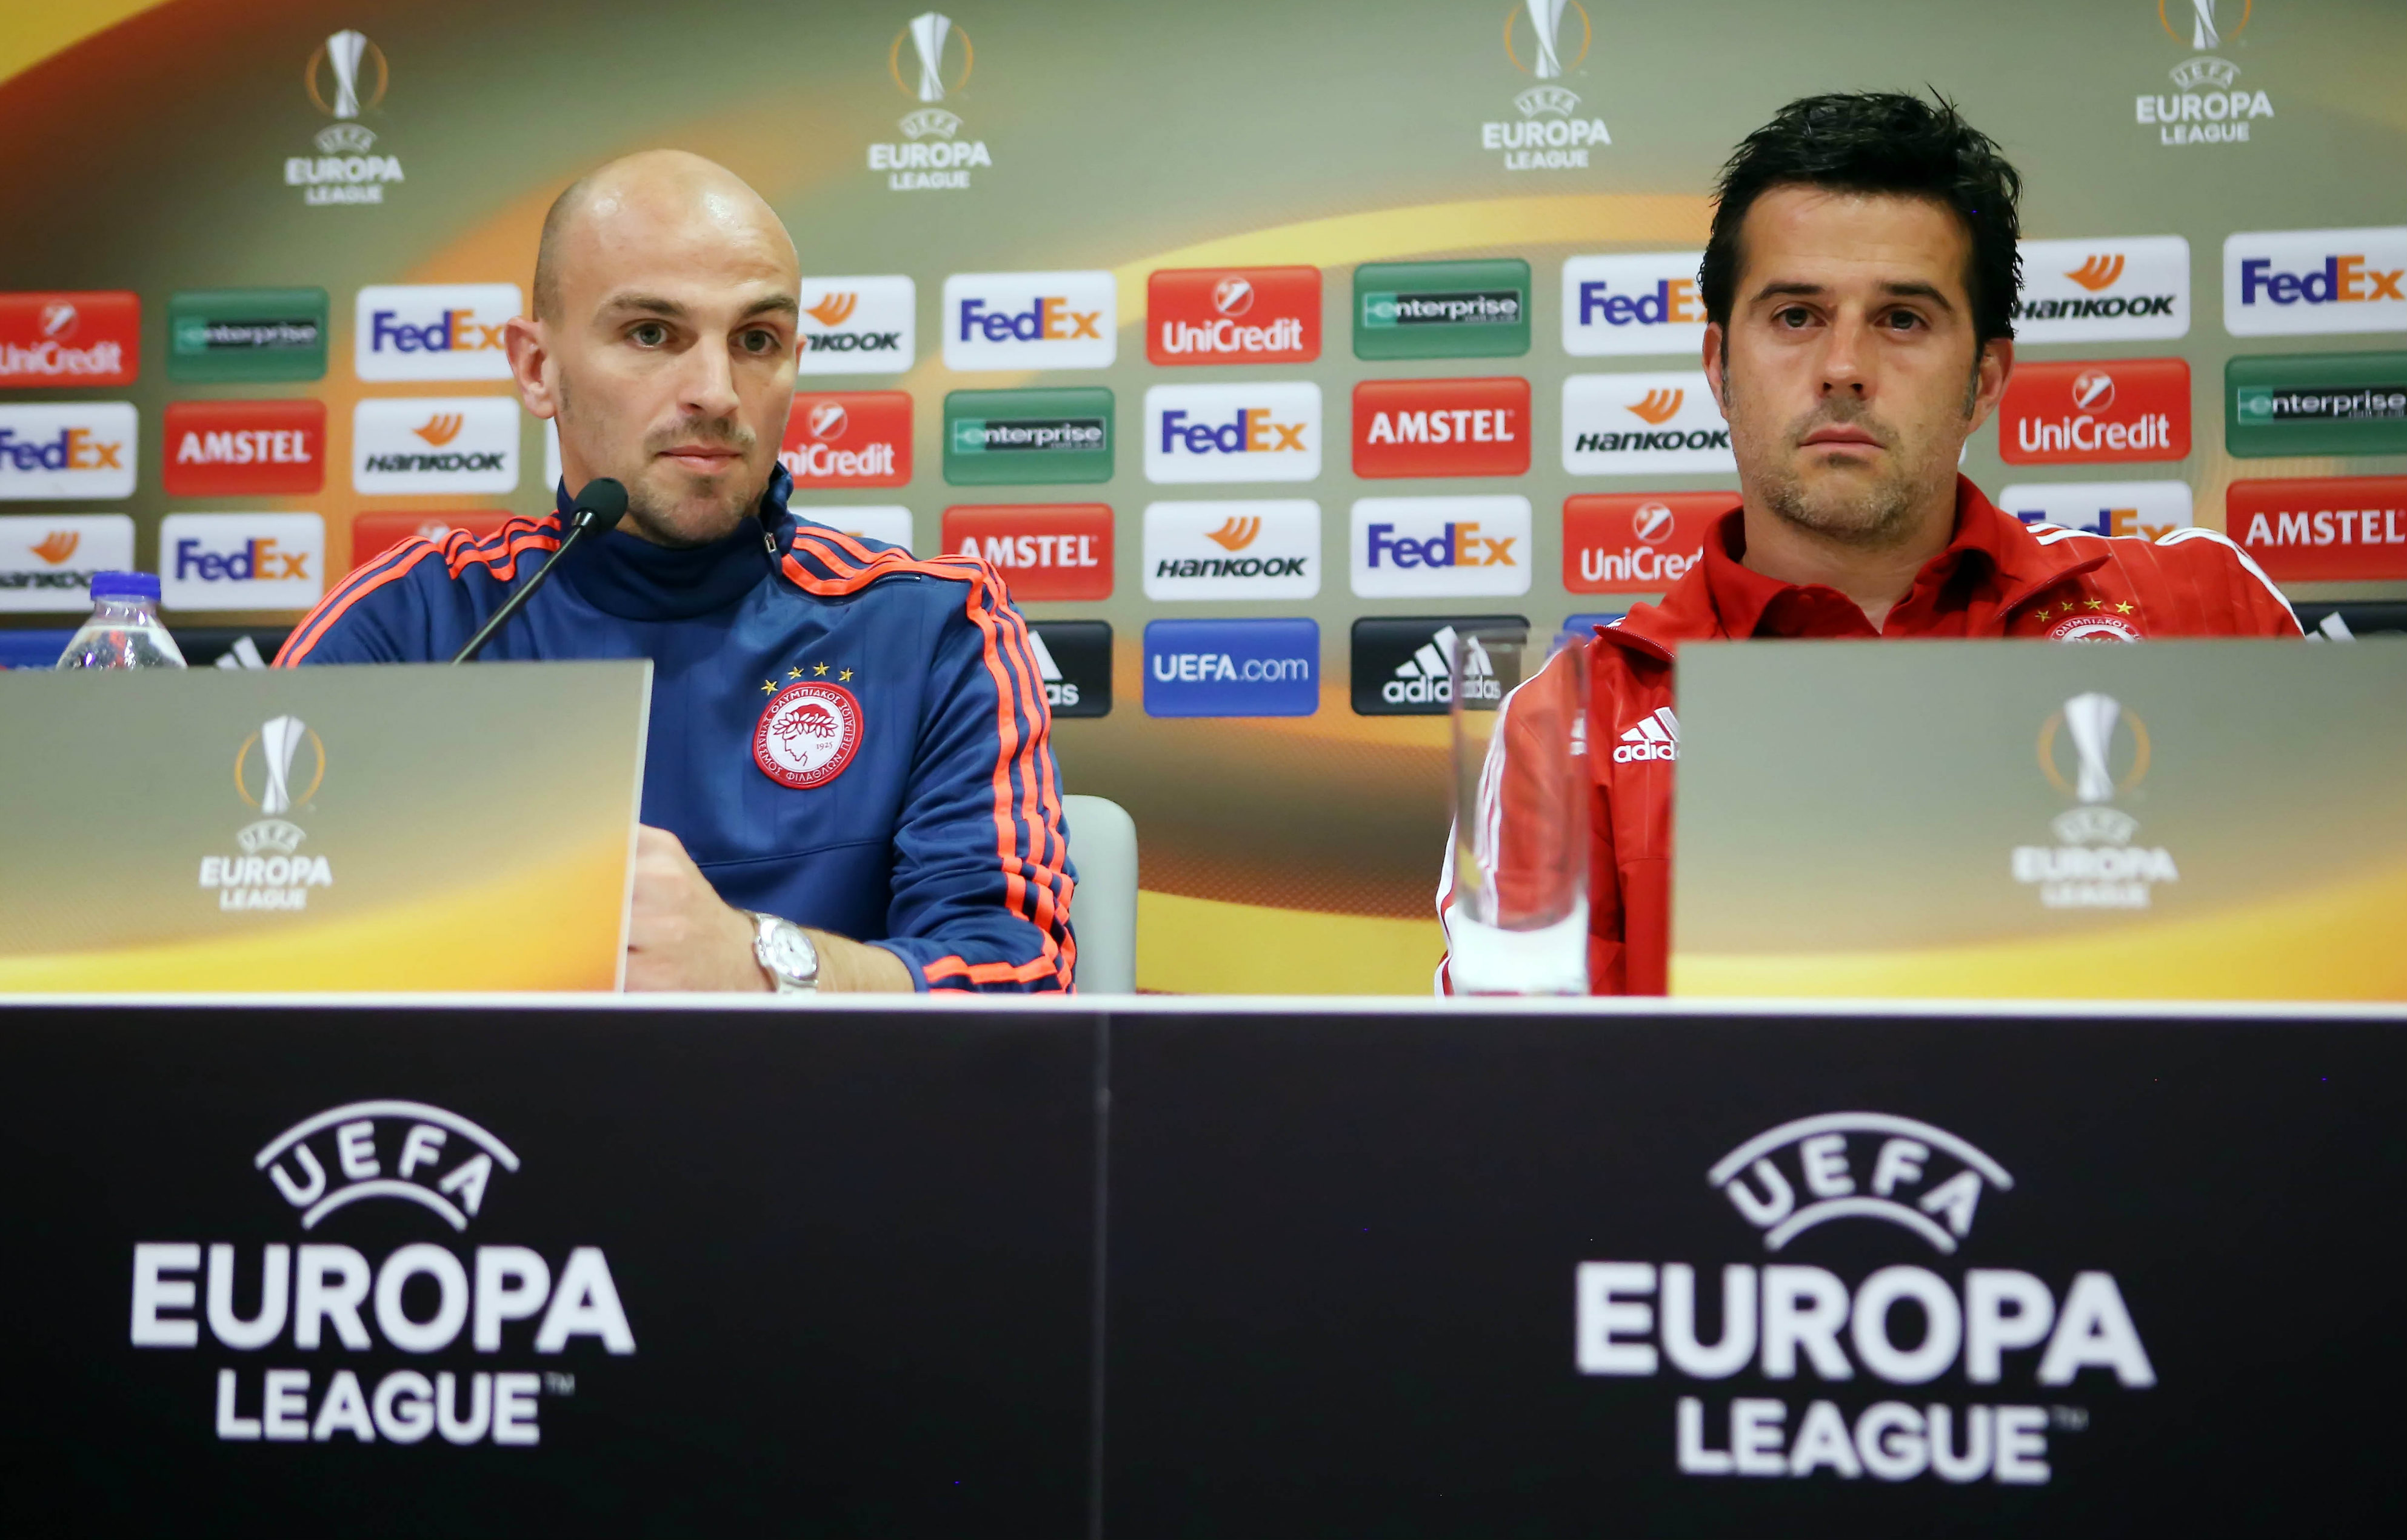 The press conference ahead of the match against Anderlecht